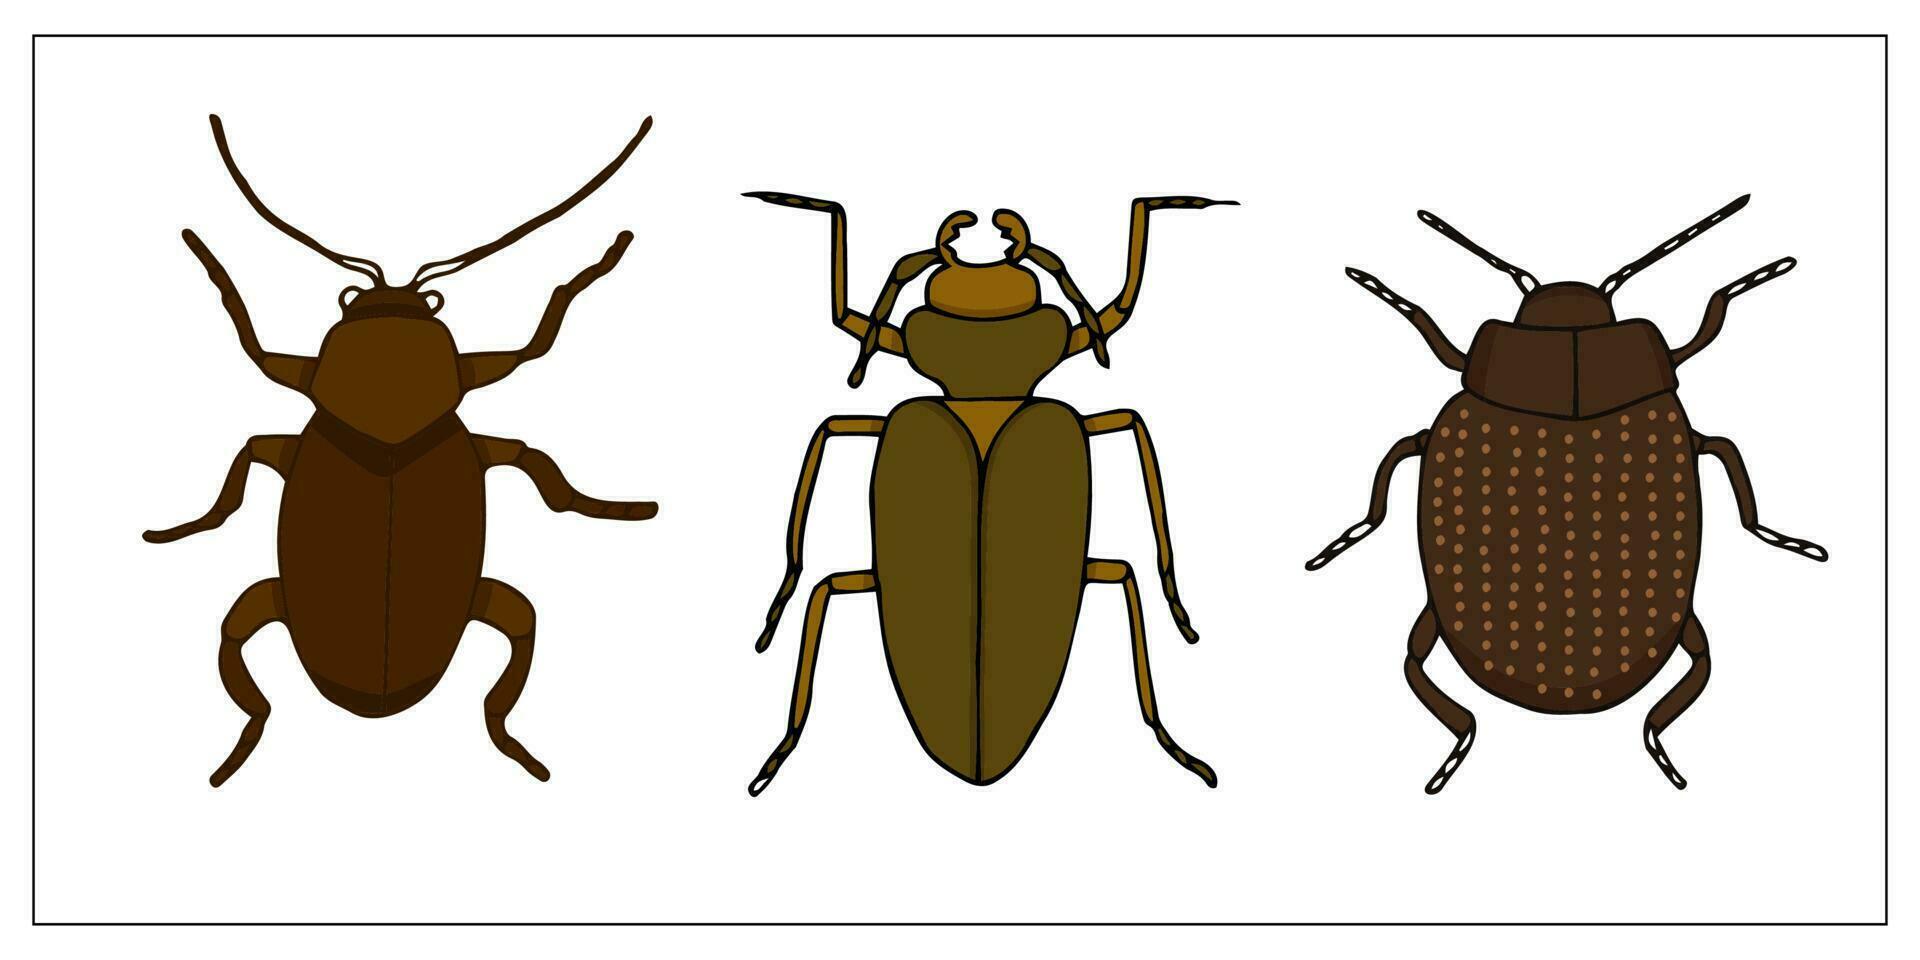 Beetles and bugs. Set of hand-drawn doodle illustration of insects. Scary and realistic bugs. Helloween decoration. vector